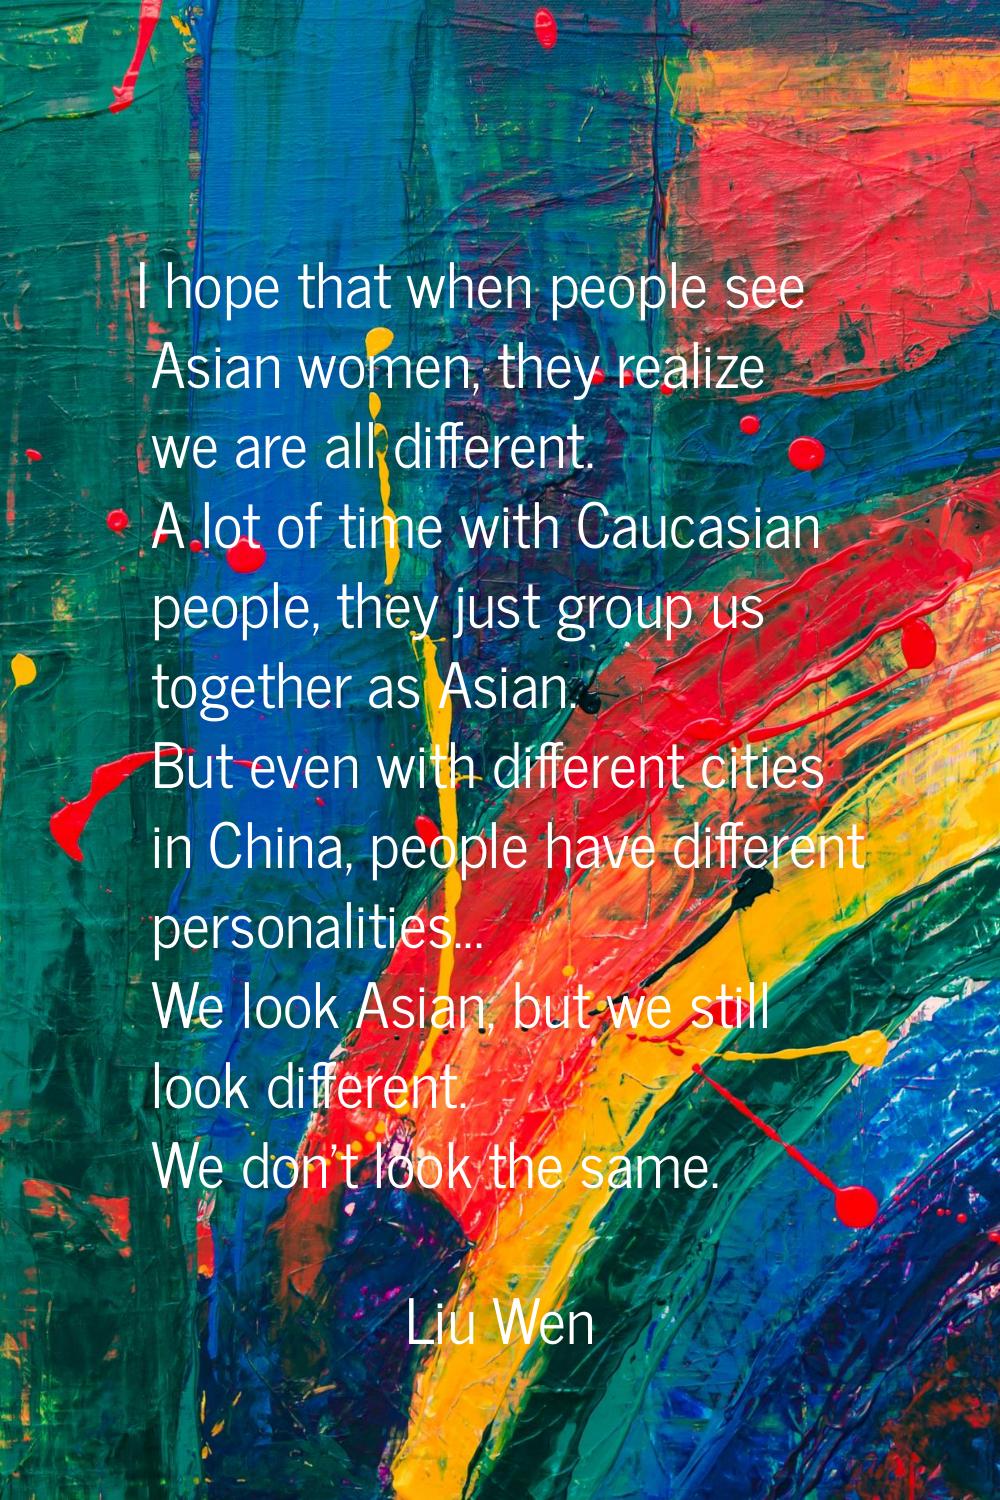 I hope that when people see Asian women, they realize we are all different. A lot of time with Cauc